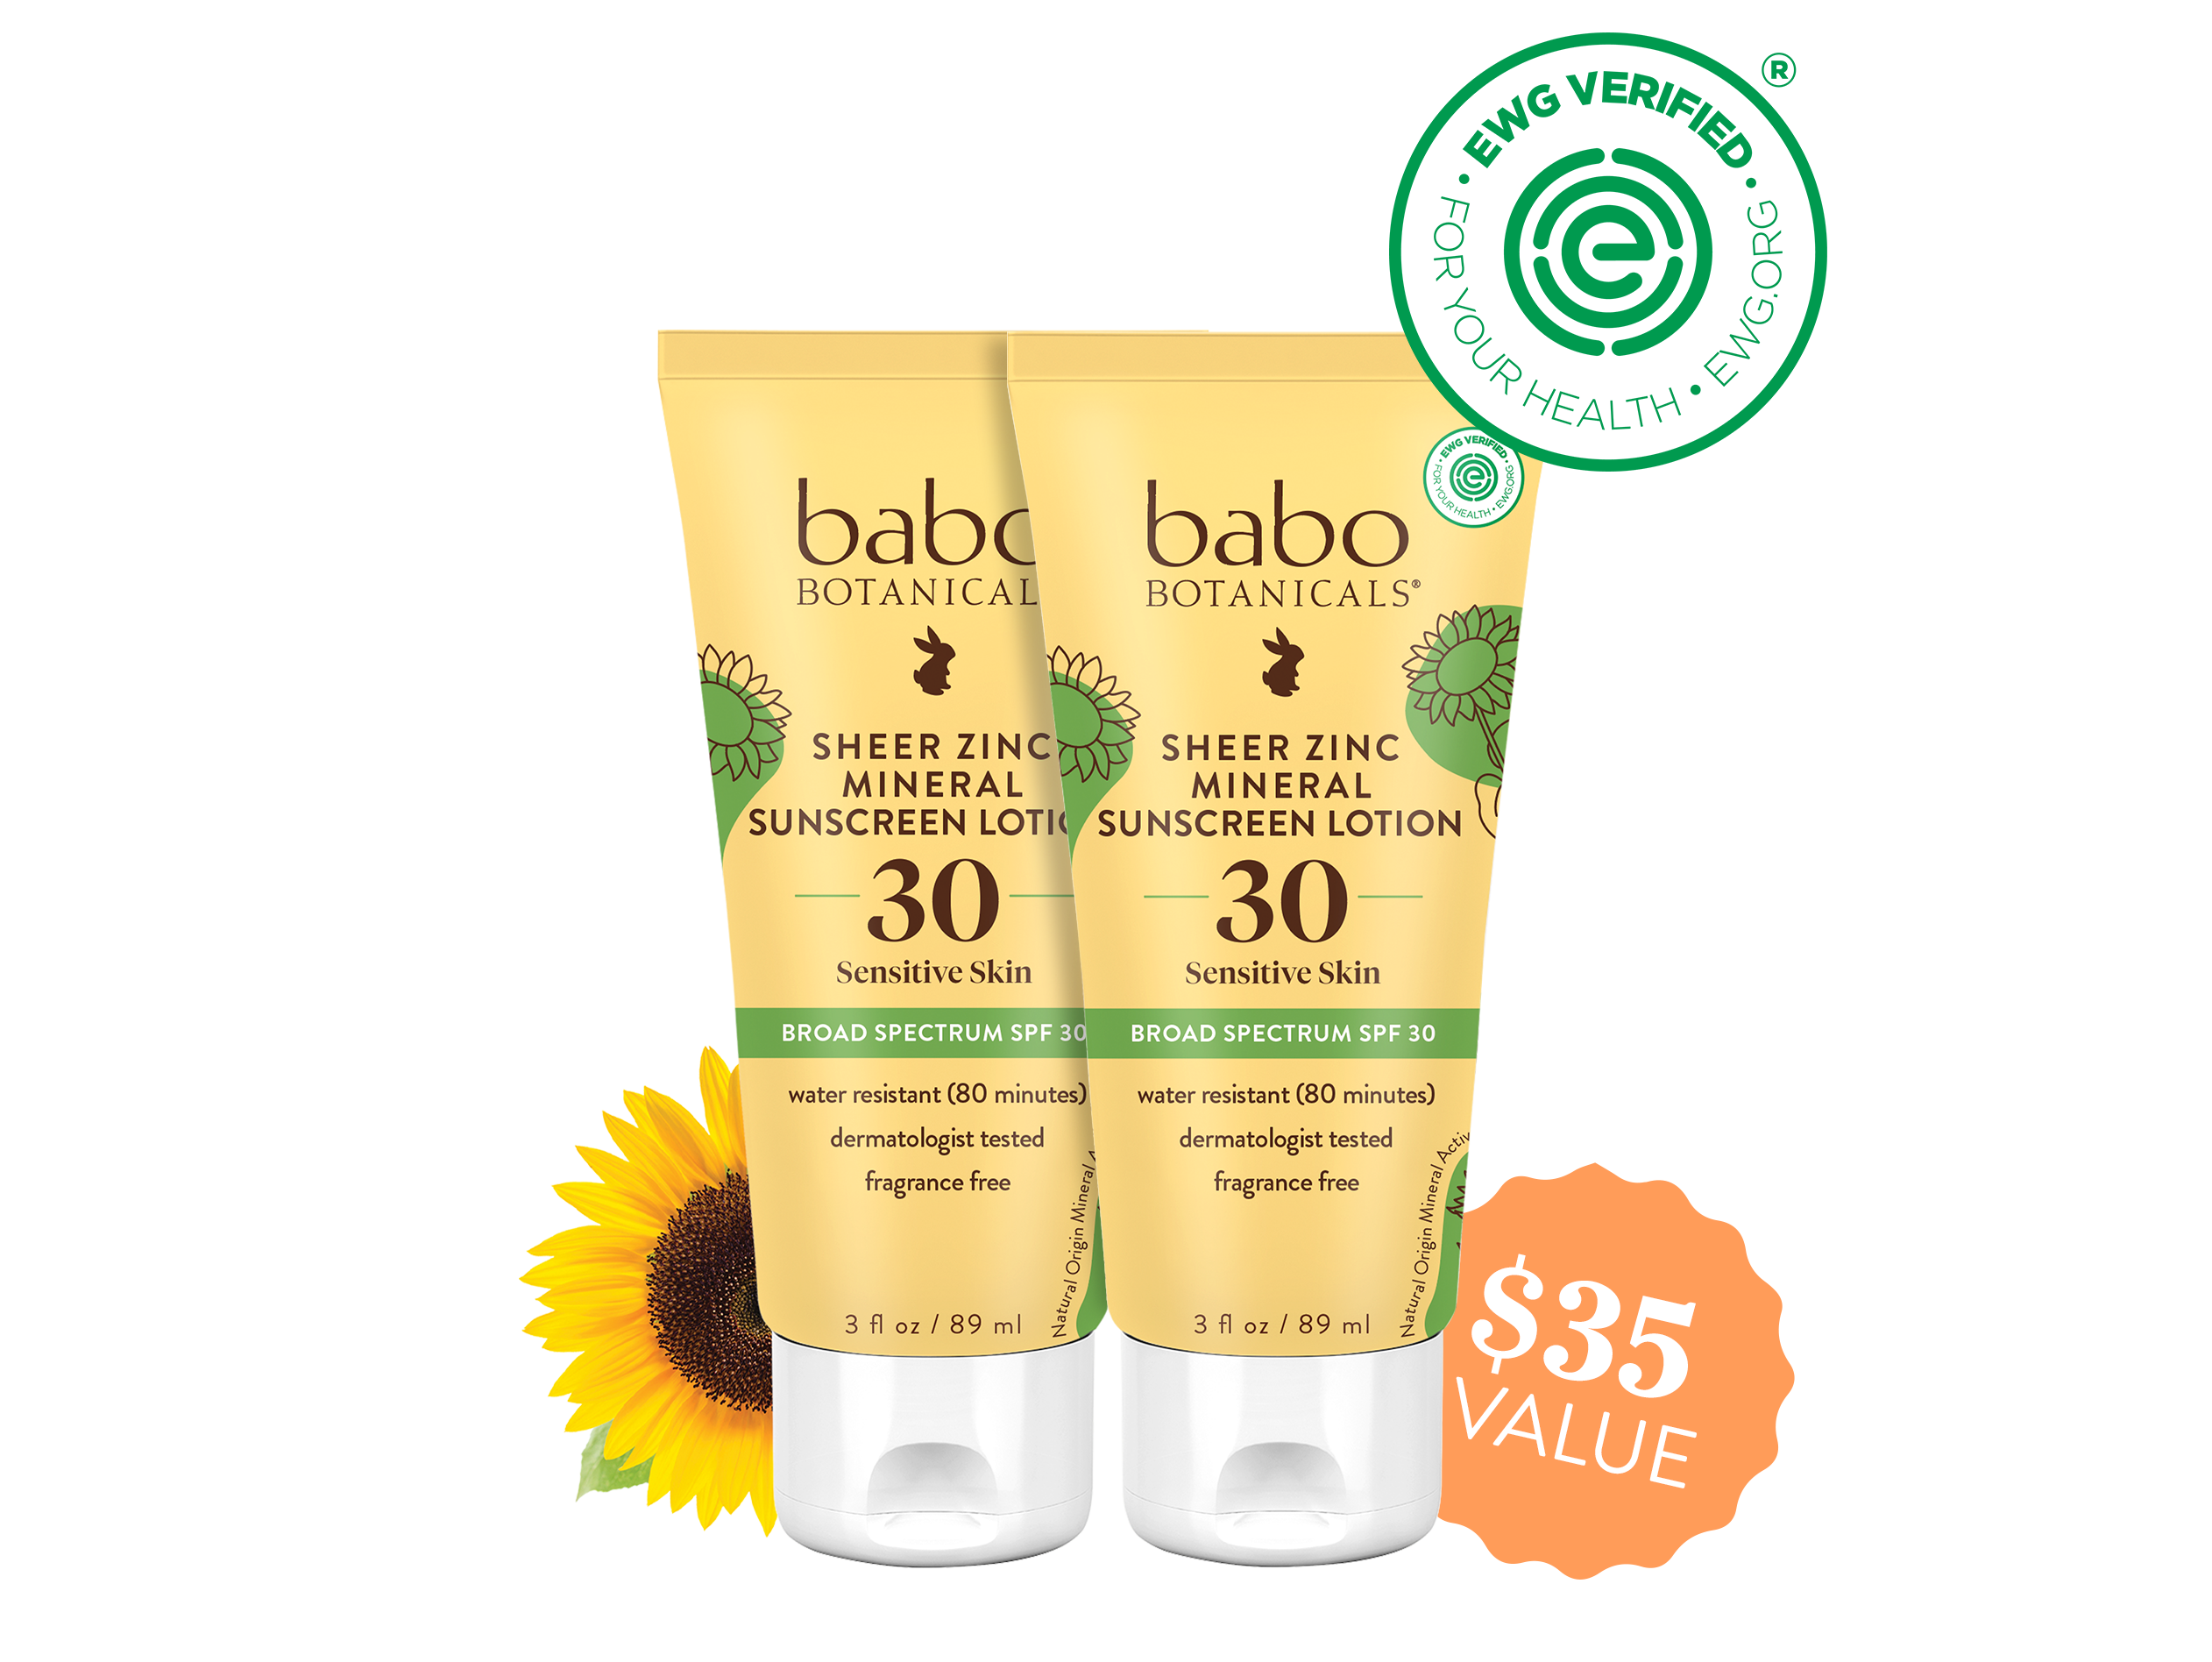 Babo Botanicals- Sheer Zinc Mineral sunscreen lotion spf30 duo- $35 value 